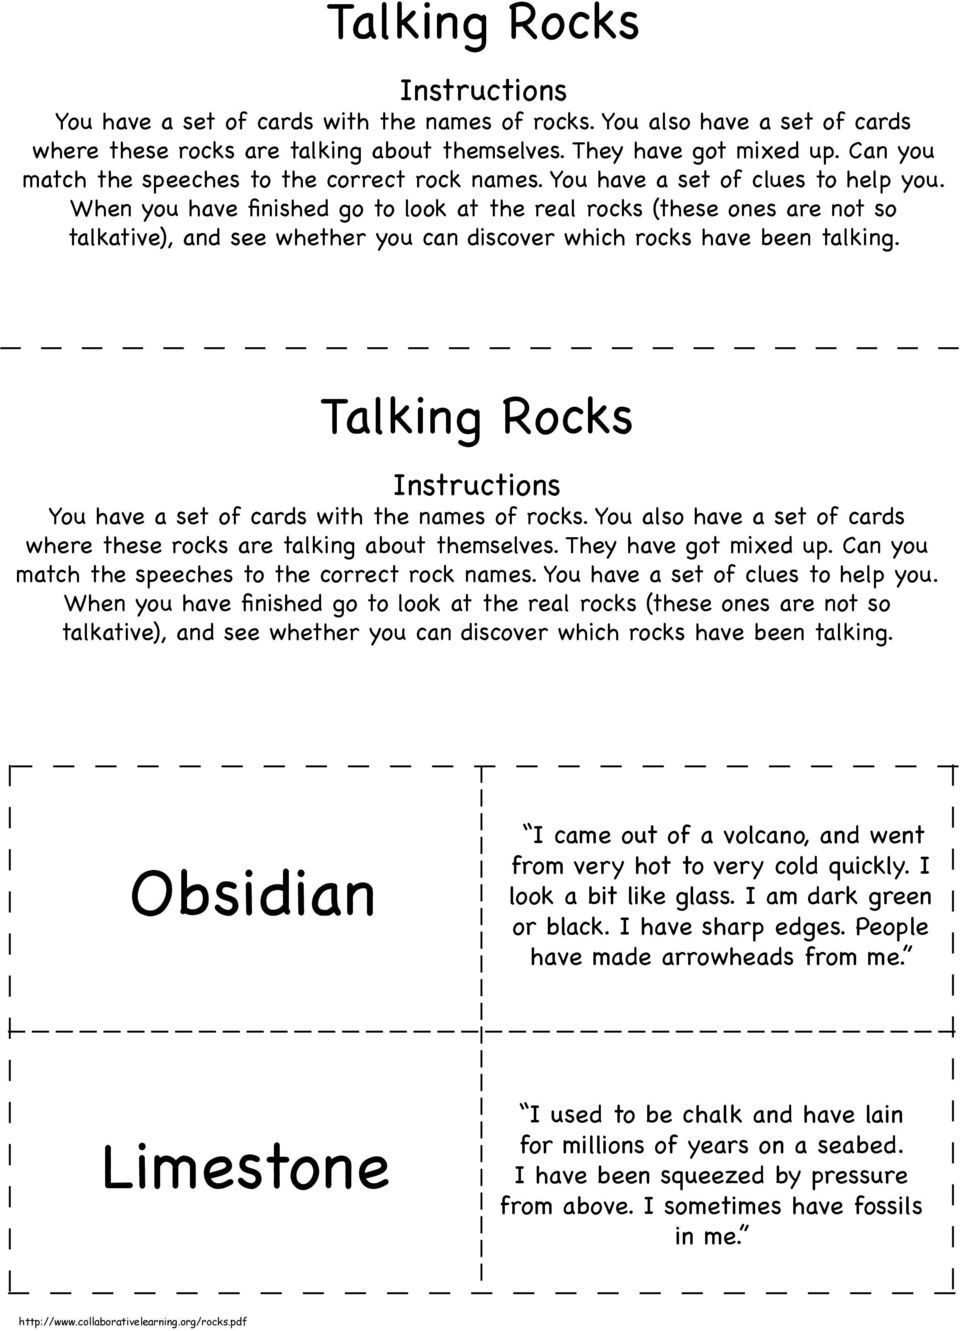 When you have finished go to look at the real rocks (these ones are not so talkative), and see whether you can discover which rocks have been talking.